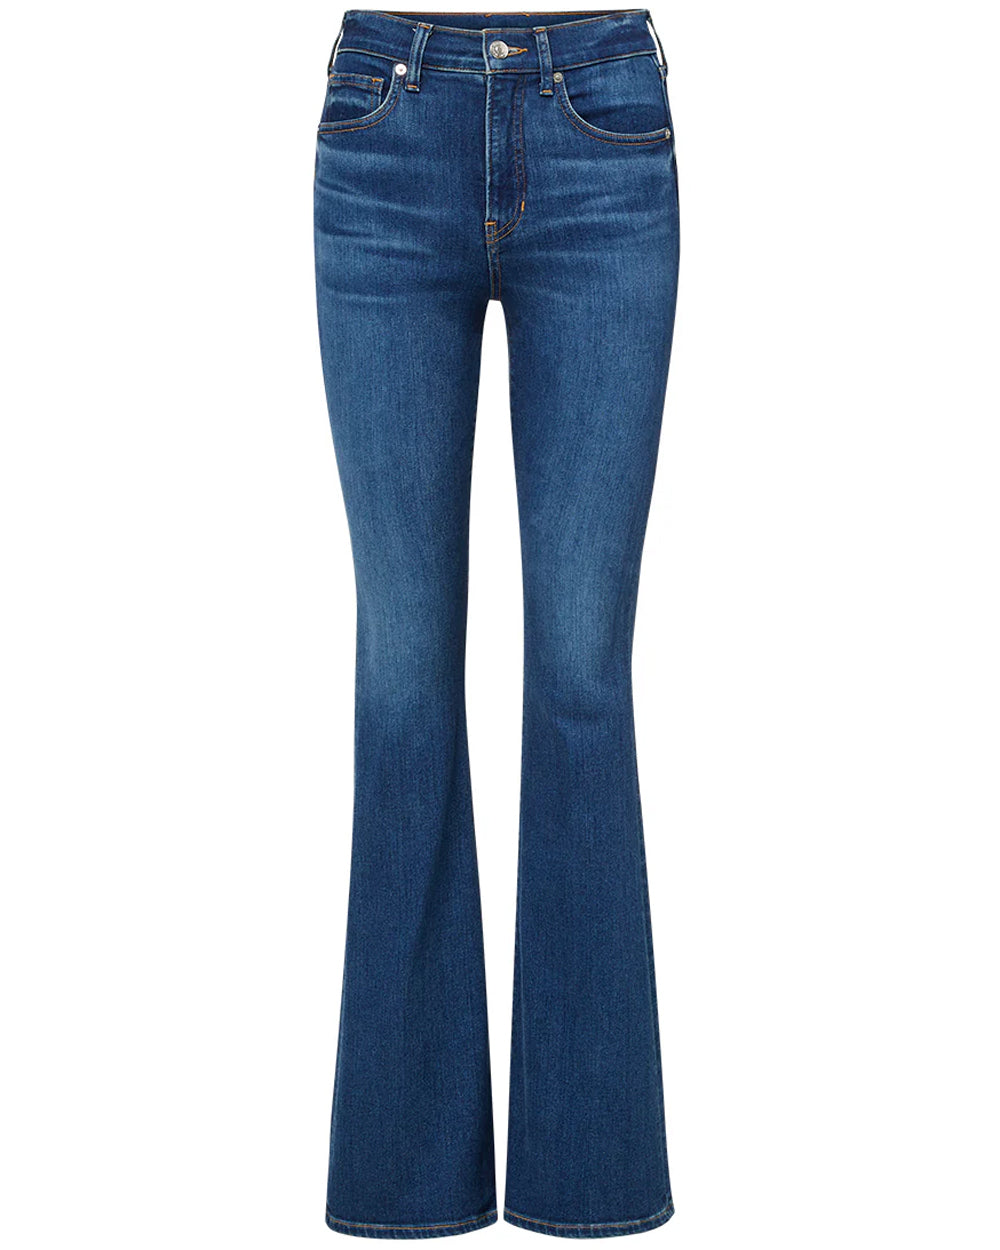 Beverly High Rise Skinny Flare Jean in Bright Blue